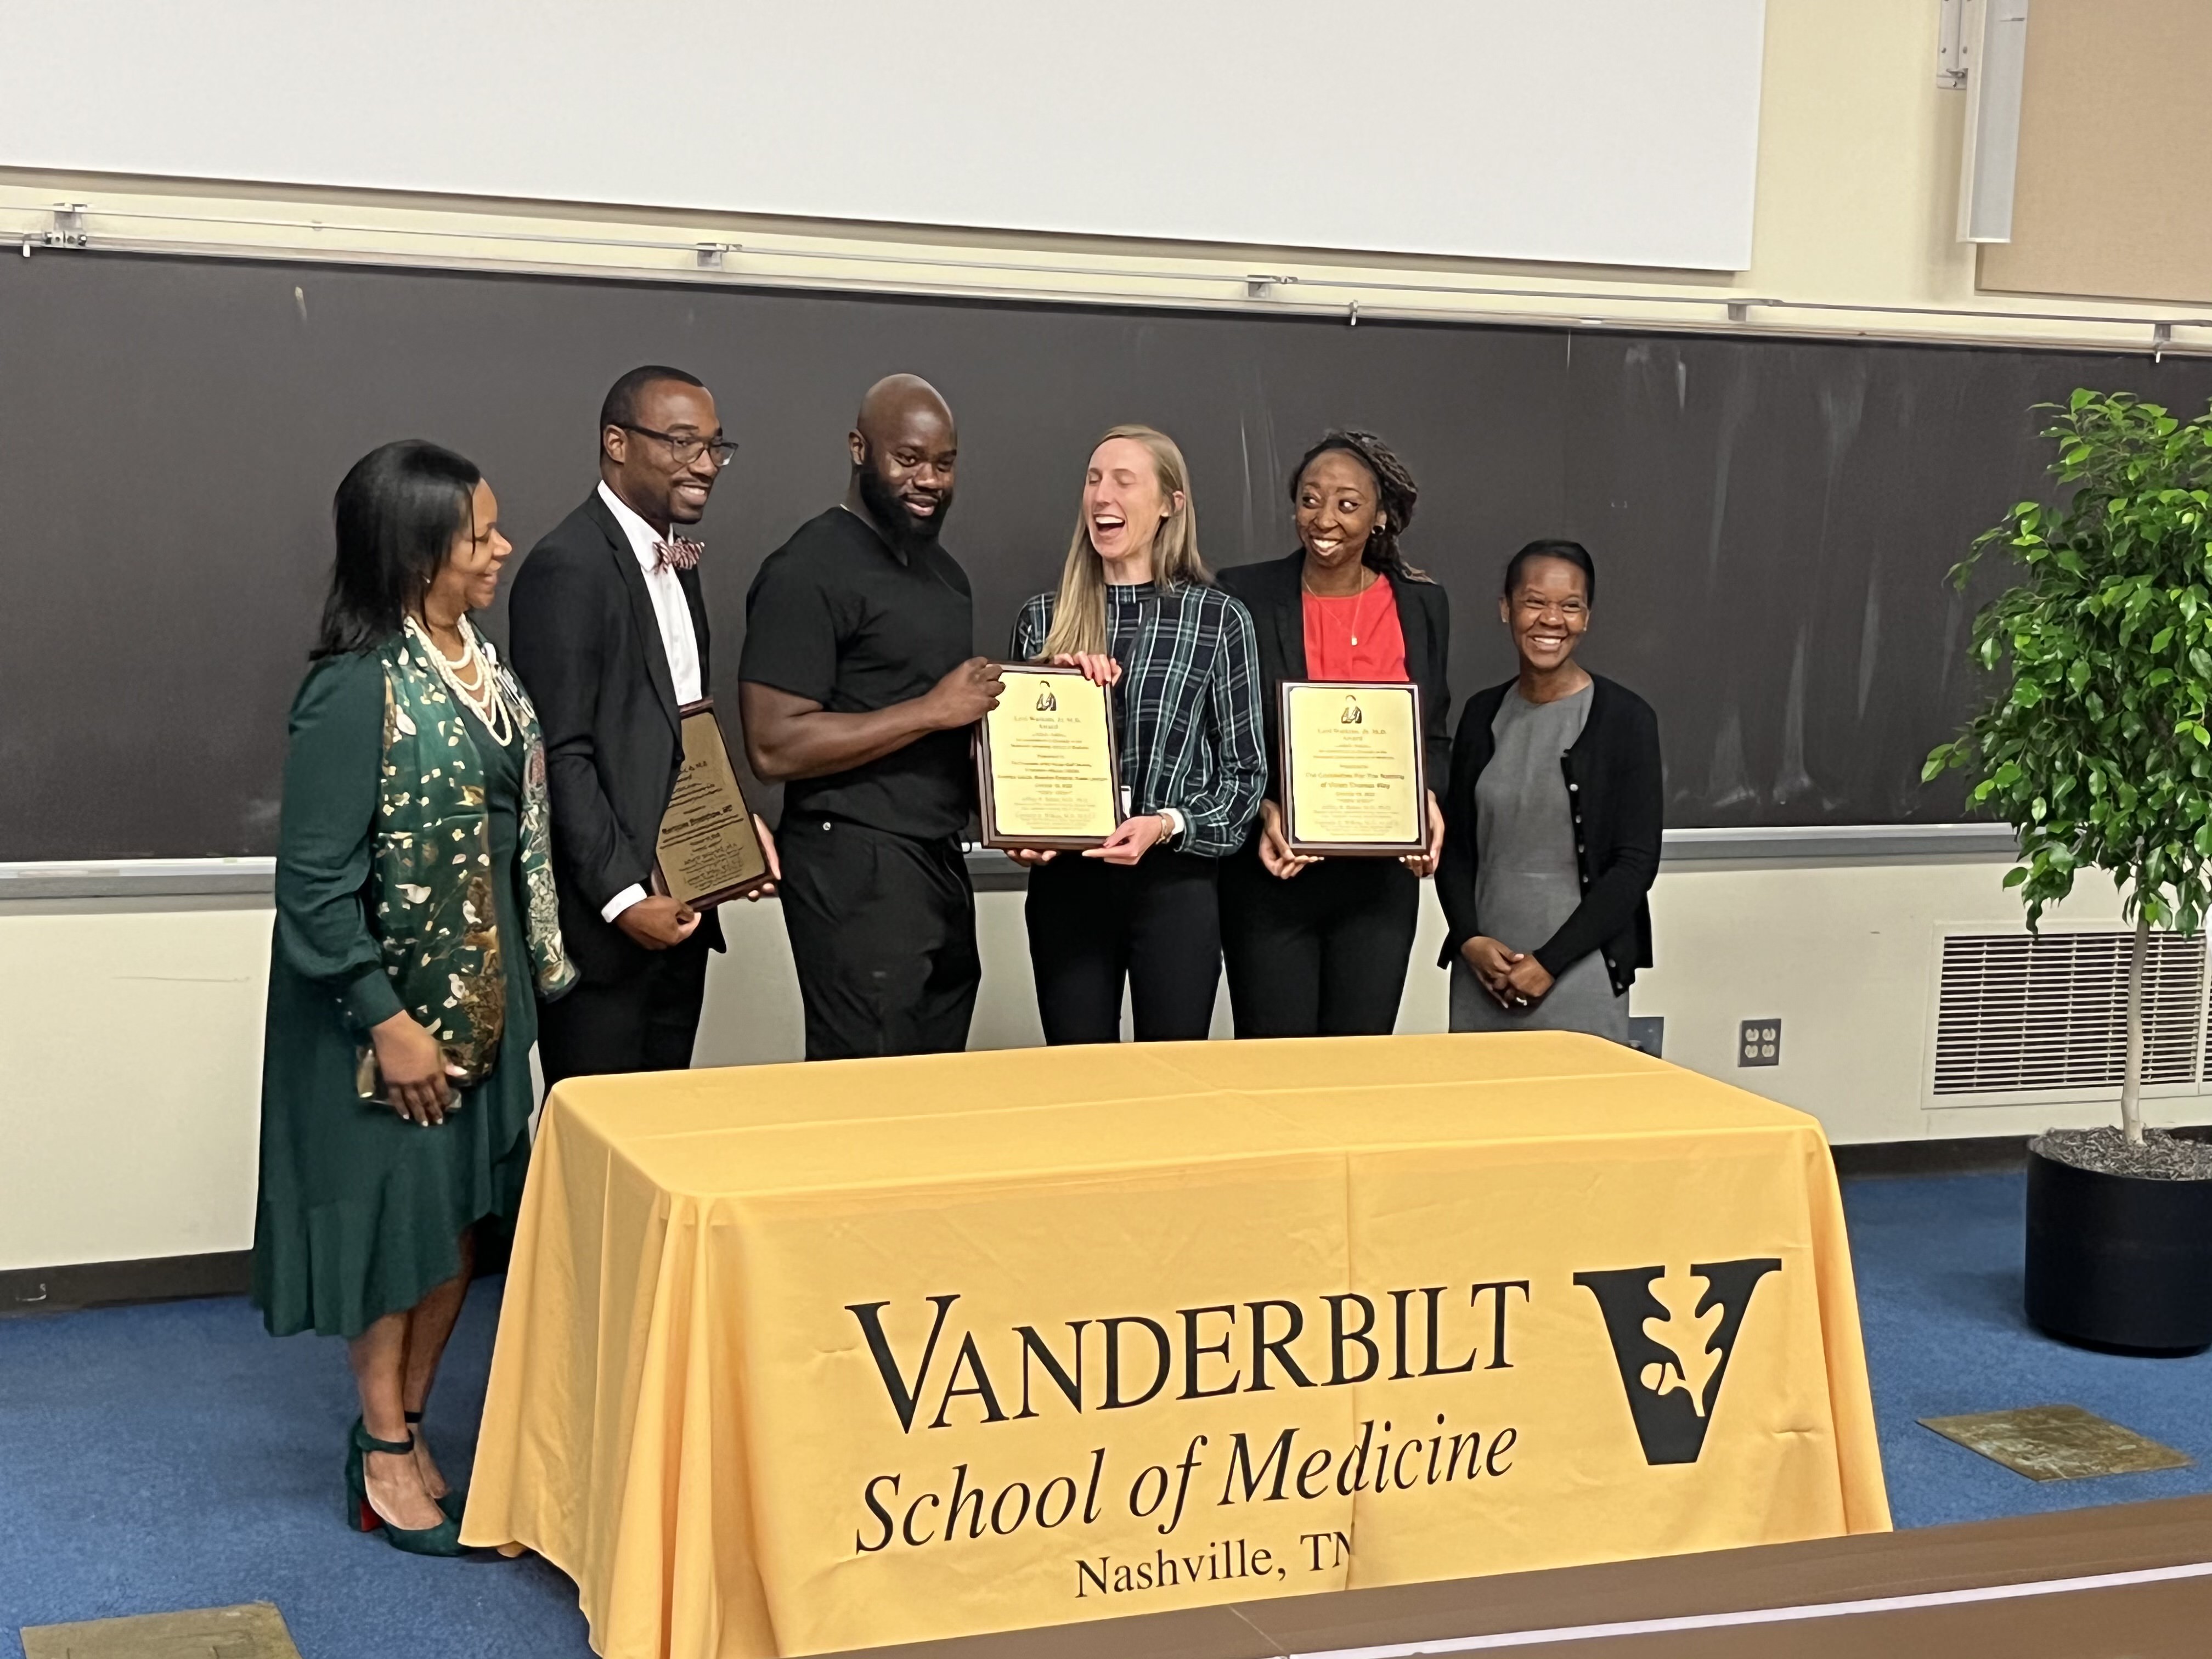 A group of students and faculty stand behind a table with a gold tablecloth that says "Vanderbilt School of Medicine"